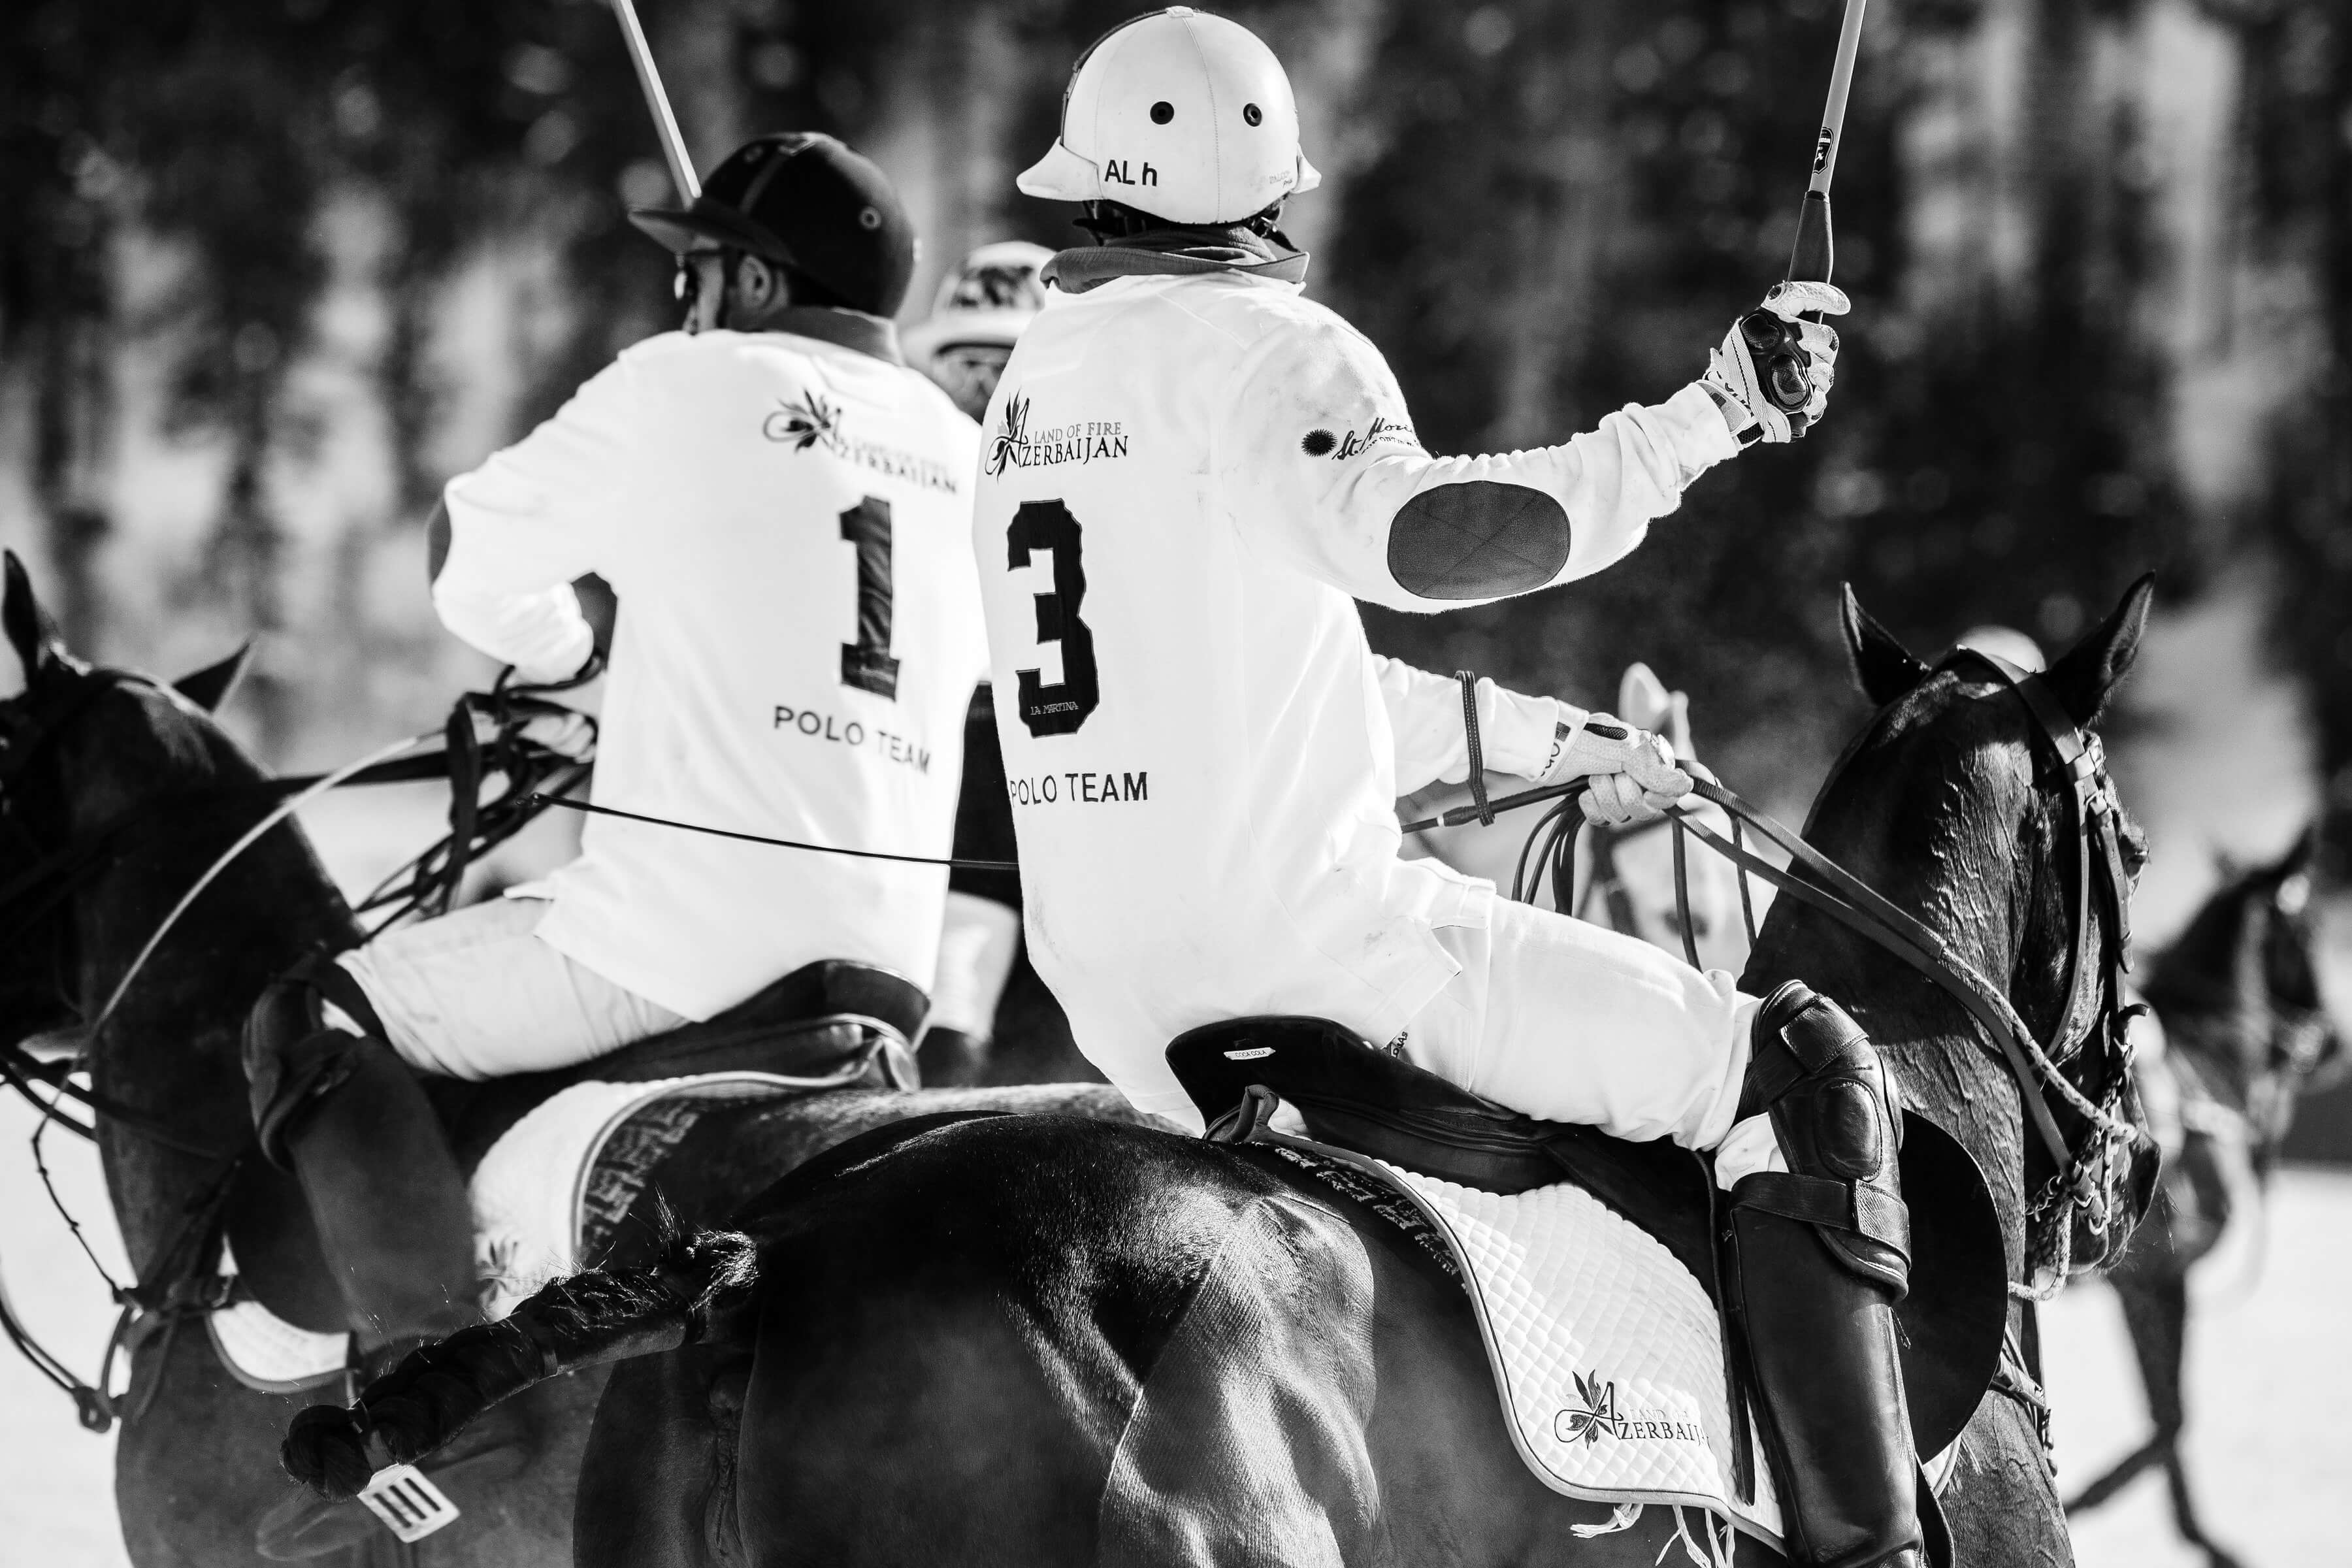 The Azerbaijan Land of Fire Snow Polo team get ready to play black and white